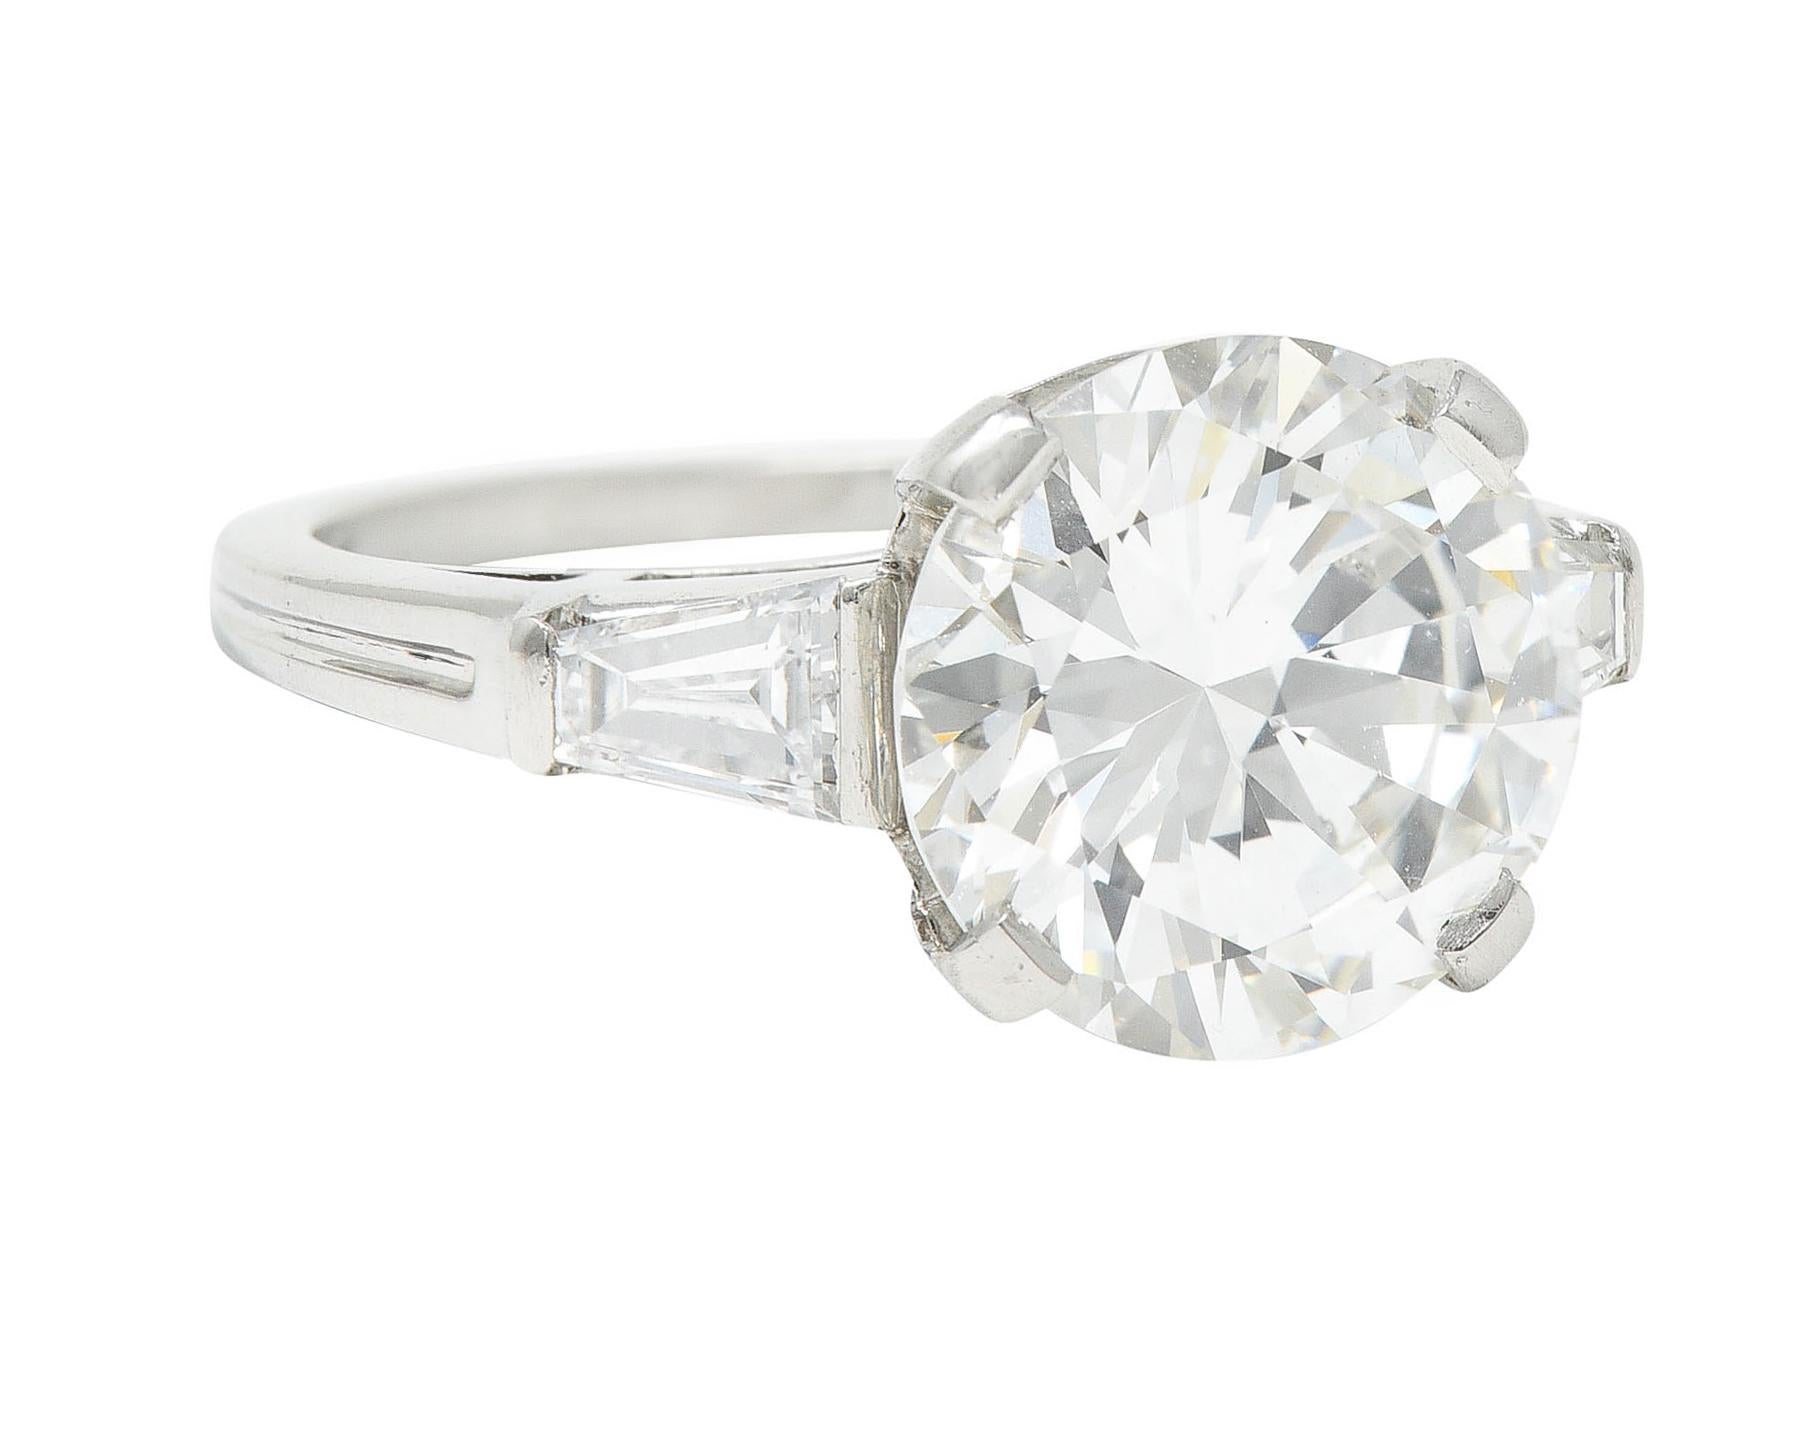 Featuring a round brilliant cut diamond weighing 3.59 carats - I color with SI1 clarity

Basket set by wide prongs and flanked by cathedral shoulders

Bar set by tapered baguette cut diamonds weighing approximately 0.35 carat total - well matched to